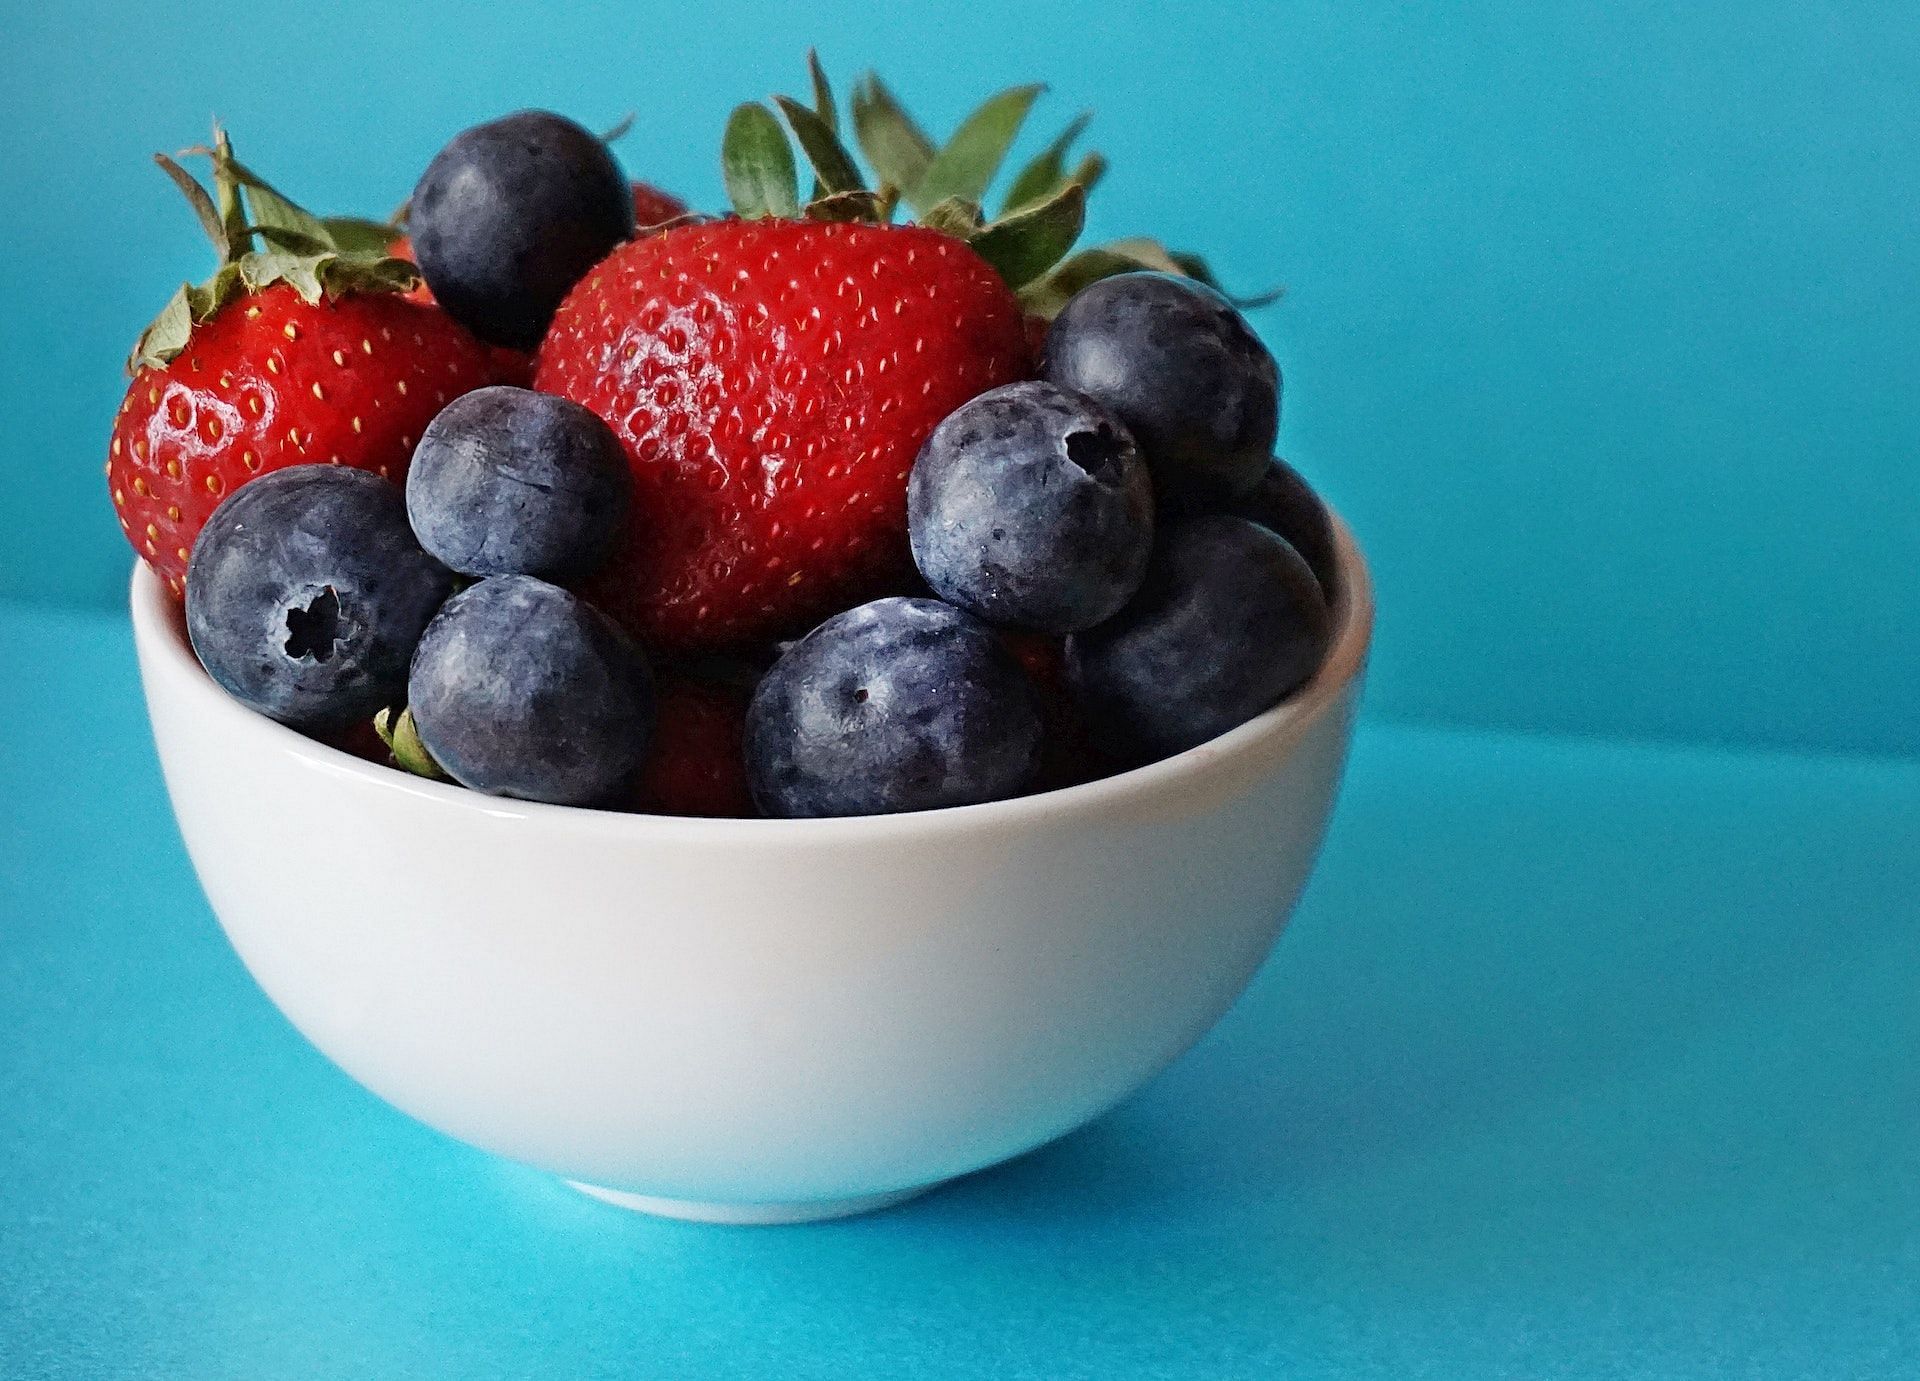 Berries are considered beneficial for weight loss. (Photo via Pexels/Suzy Hazelwood)